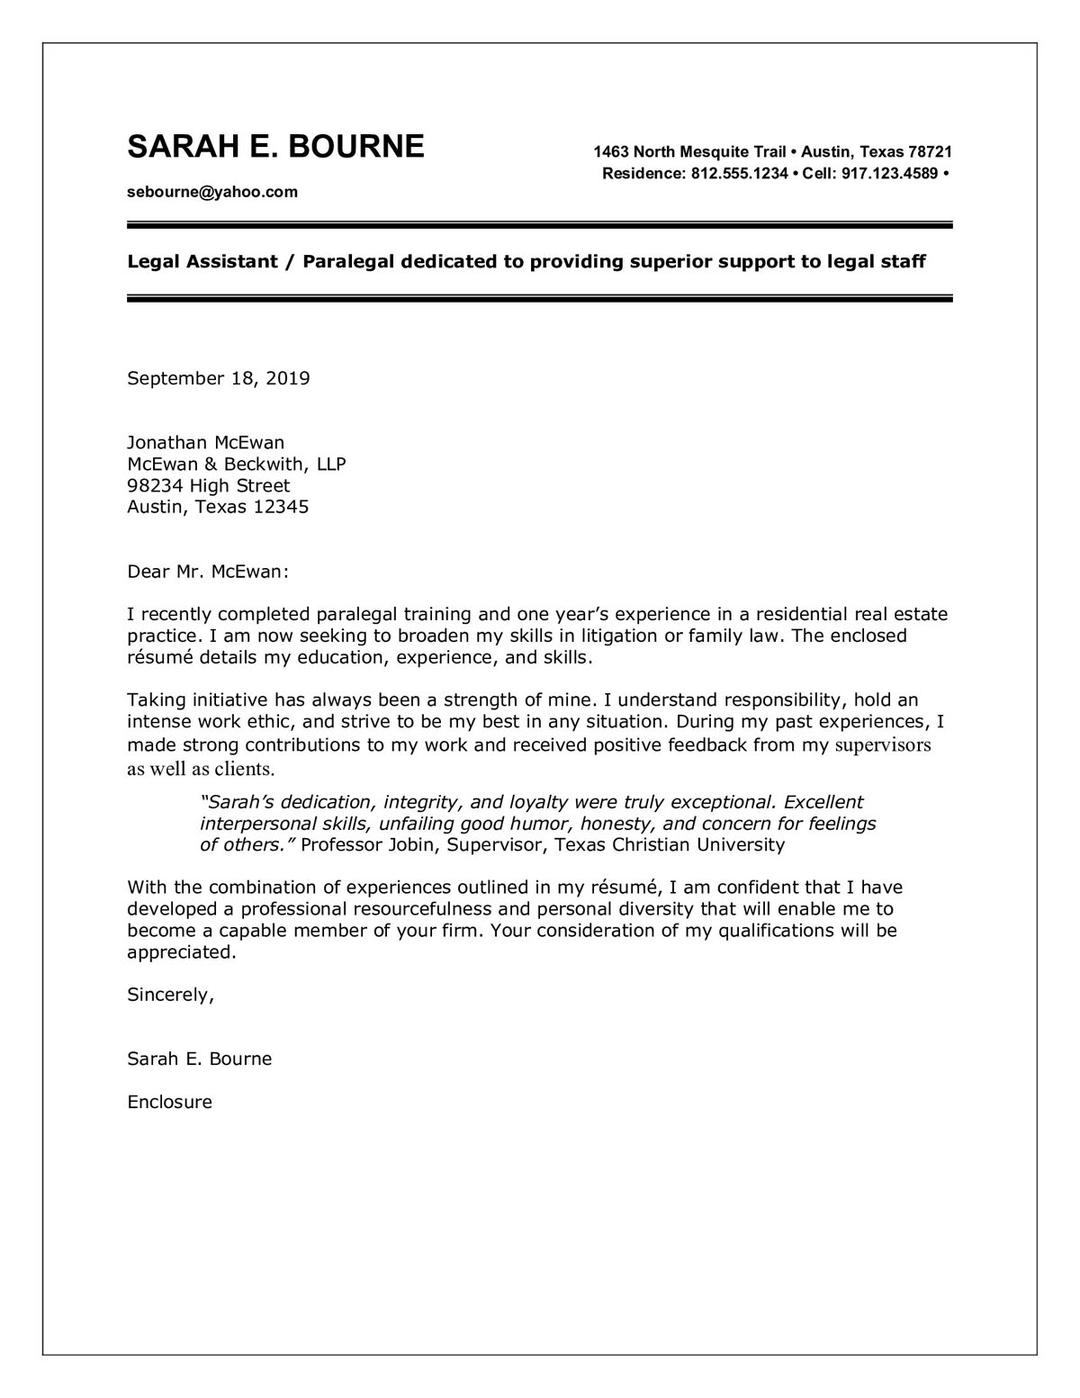 paralegal cover letter template